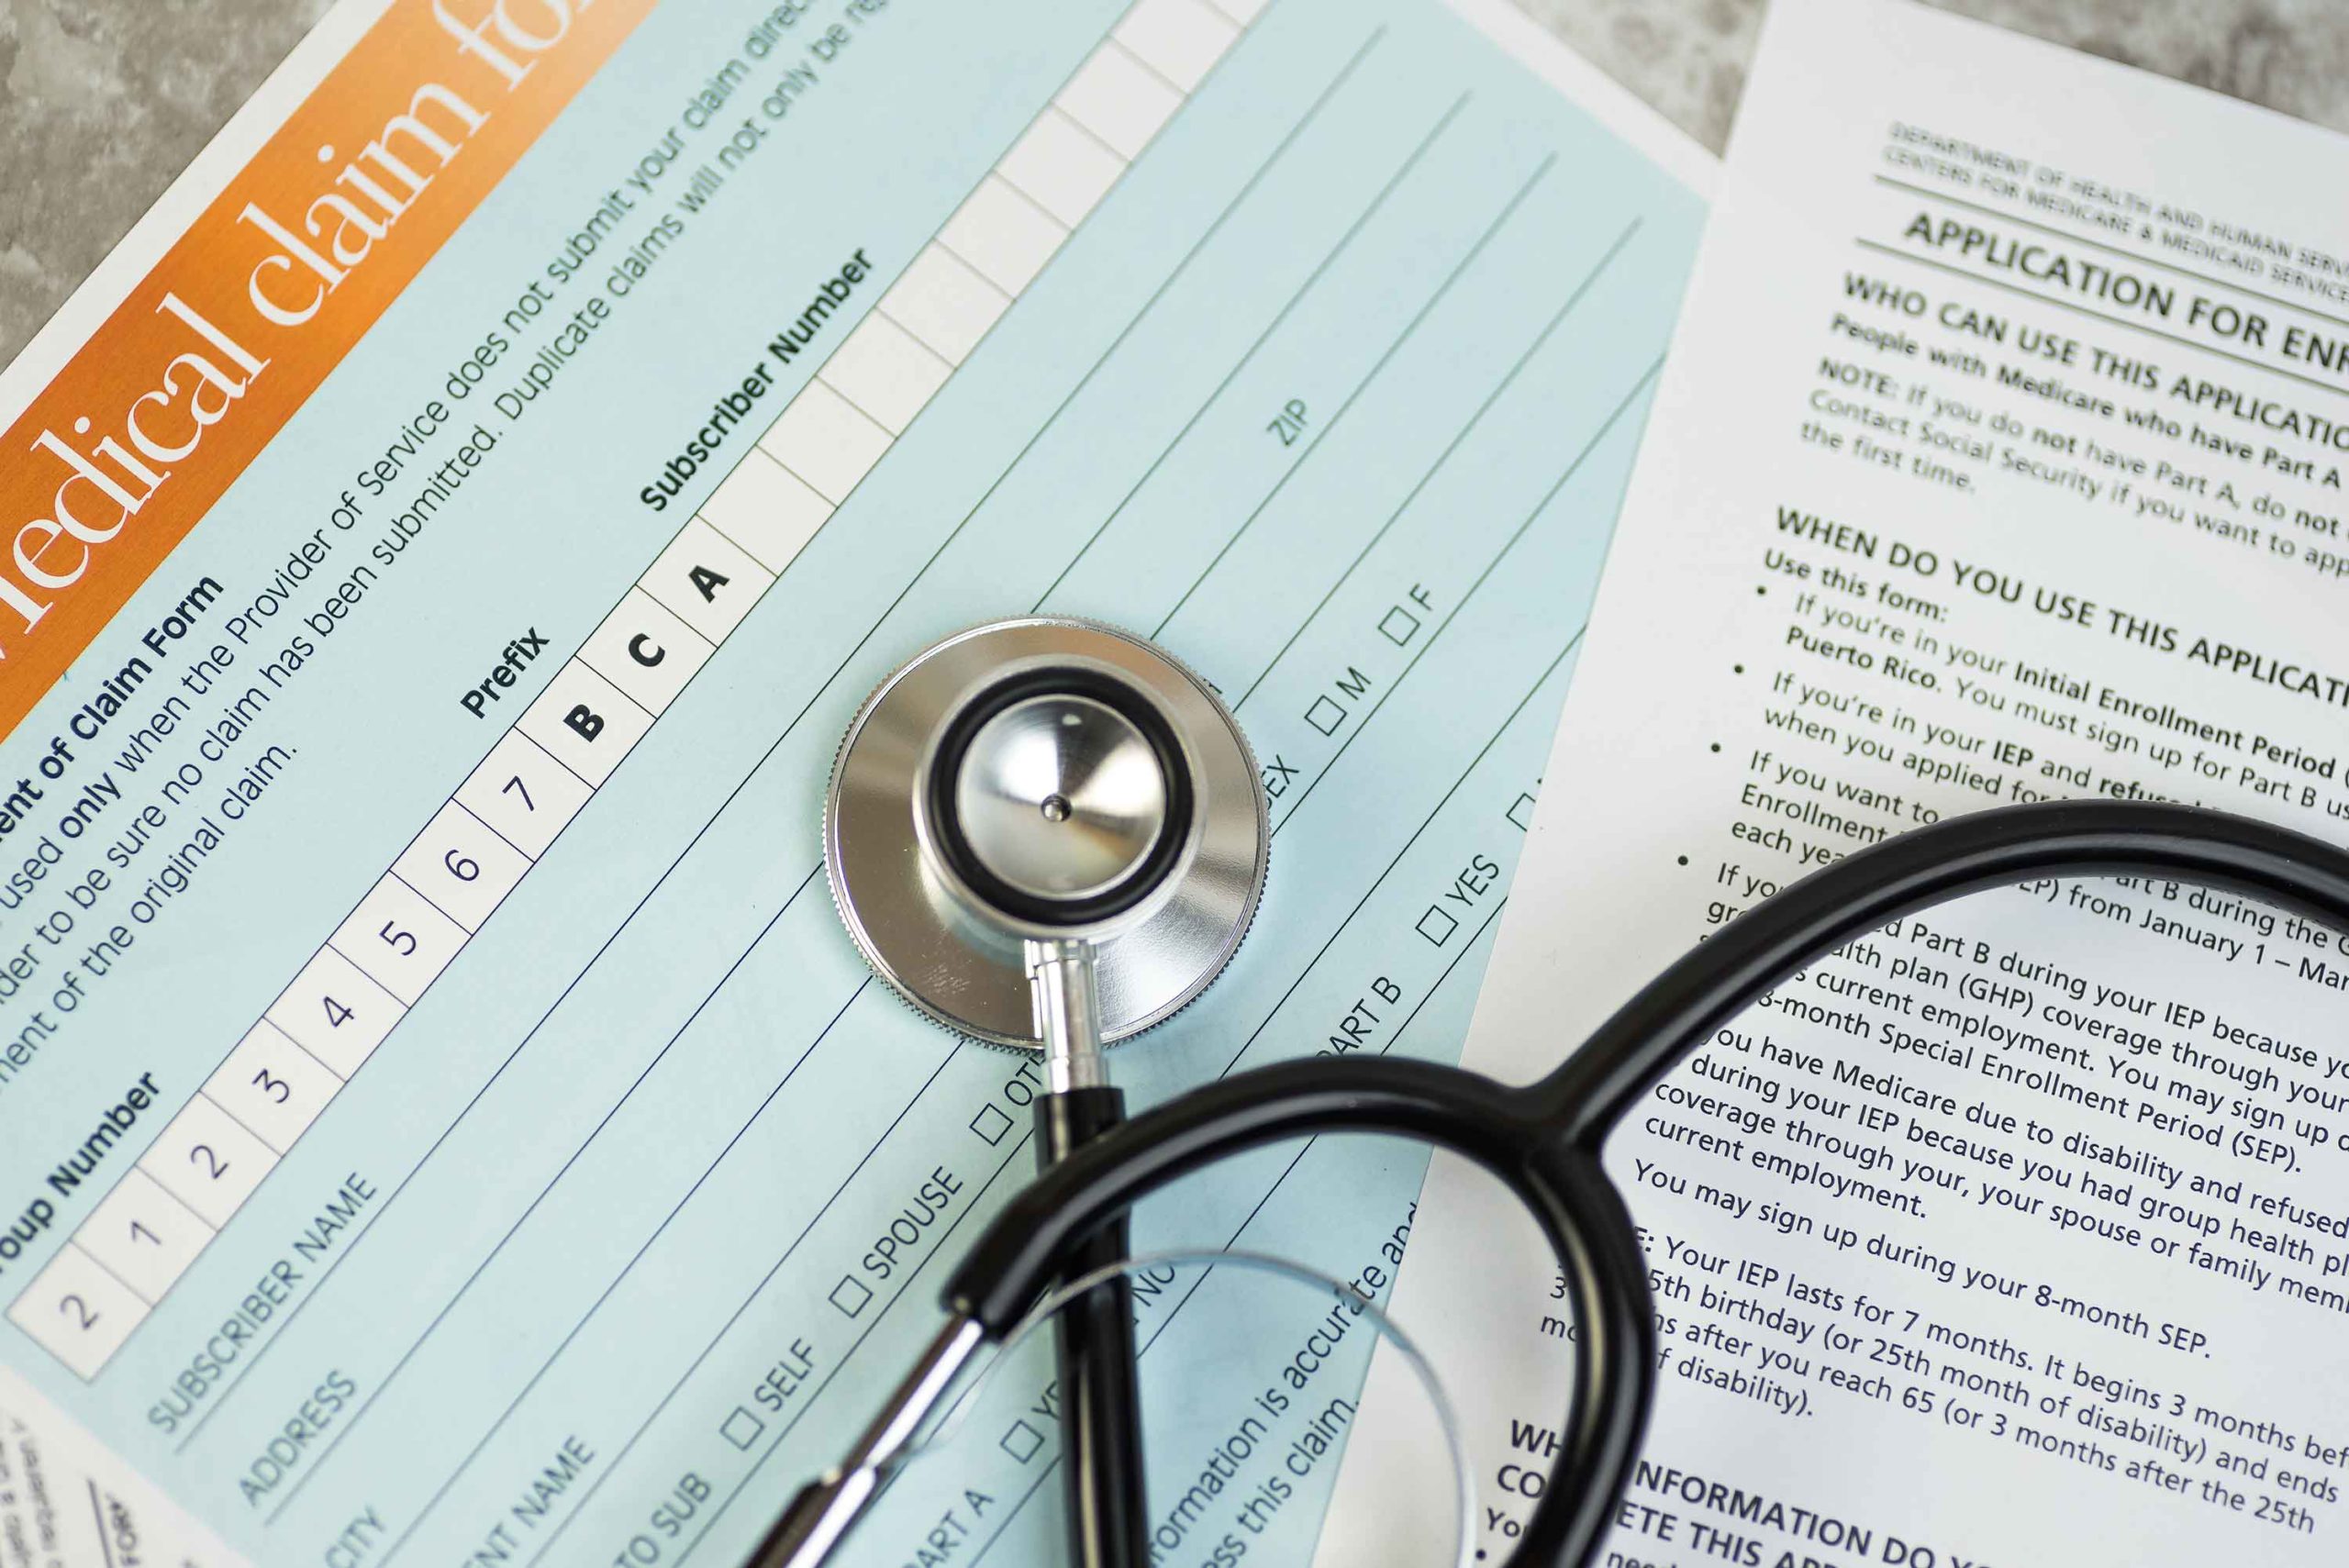 Does my Health Insurance Affect SSDI?